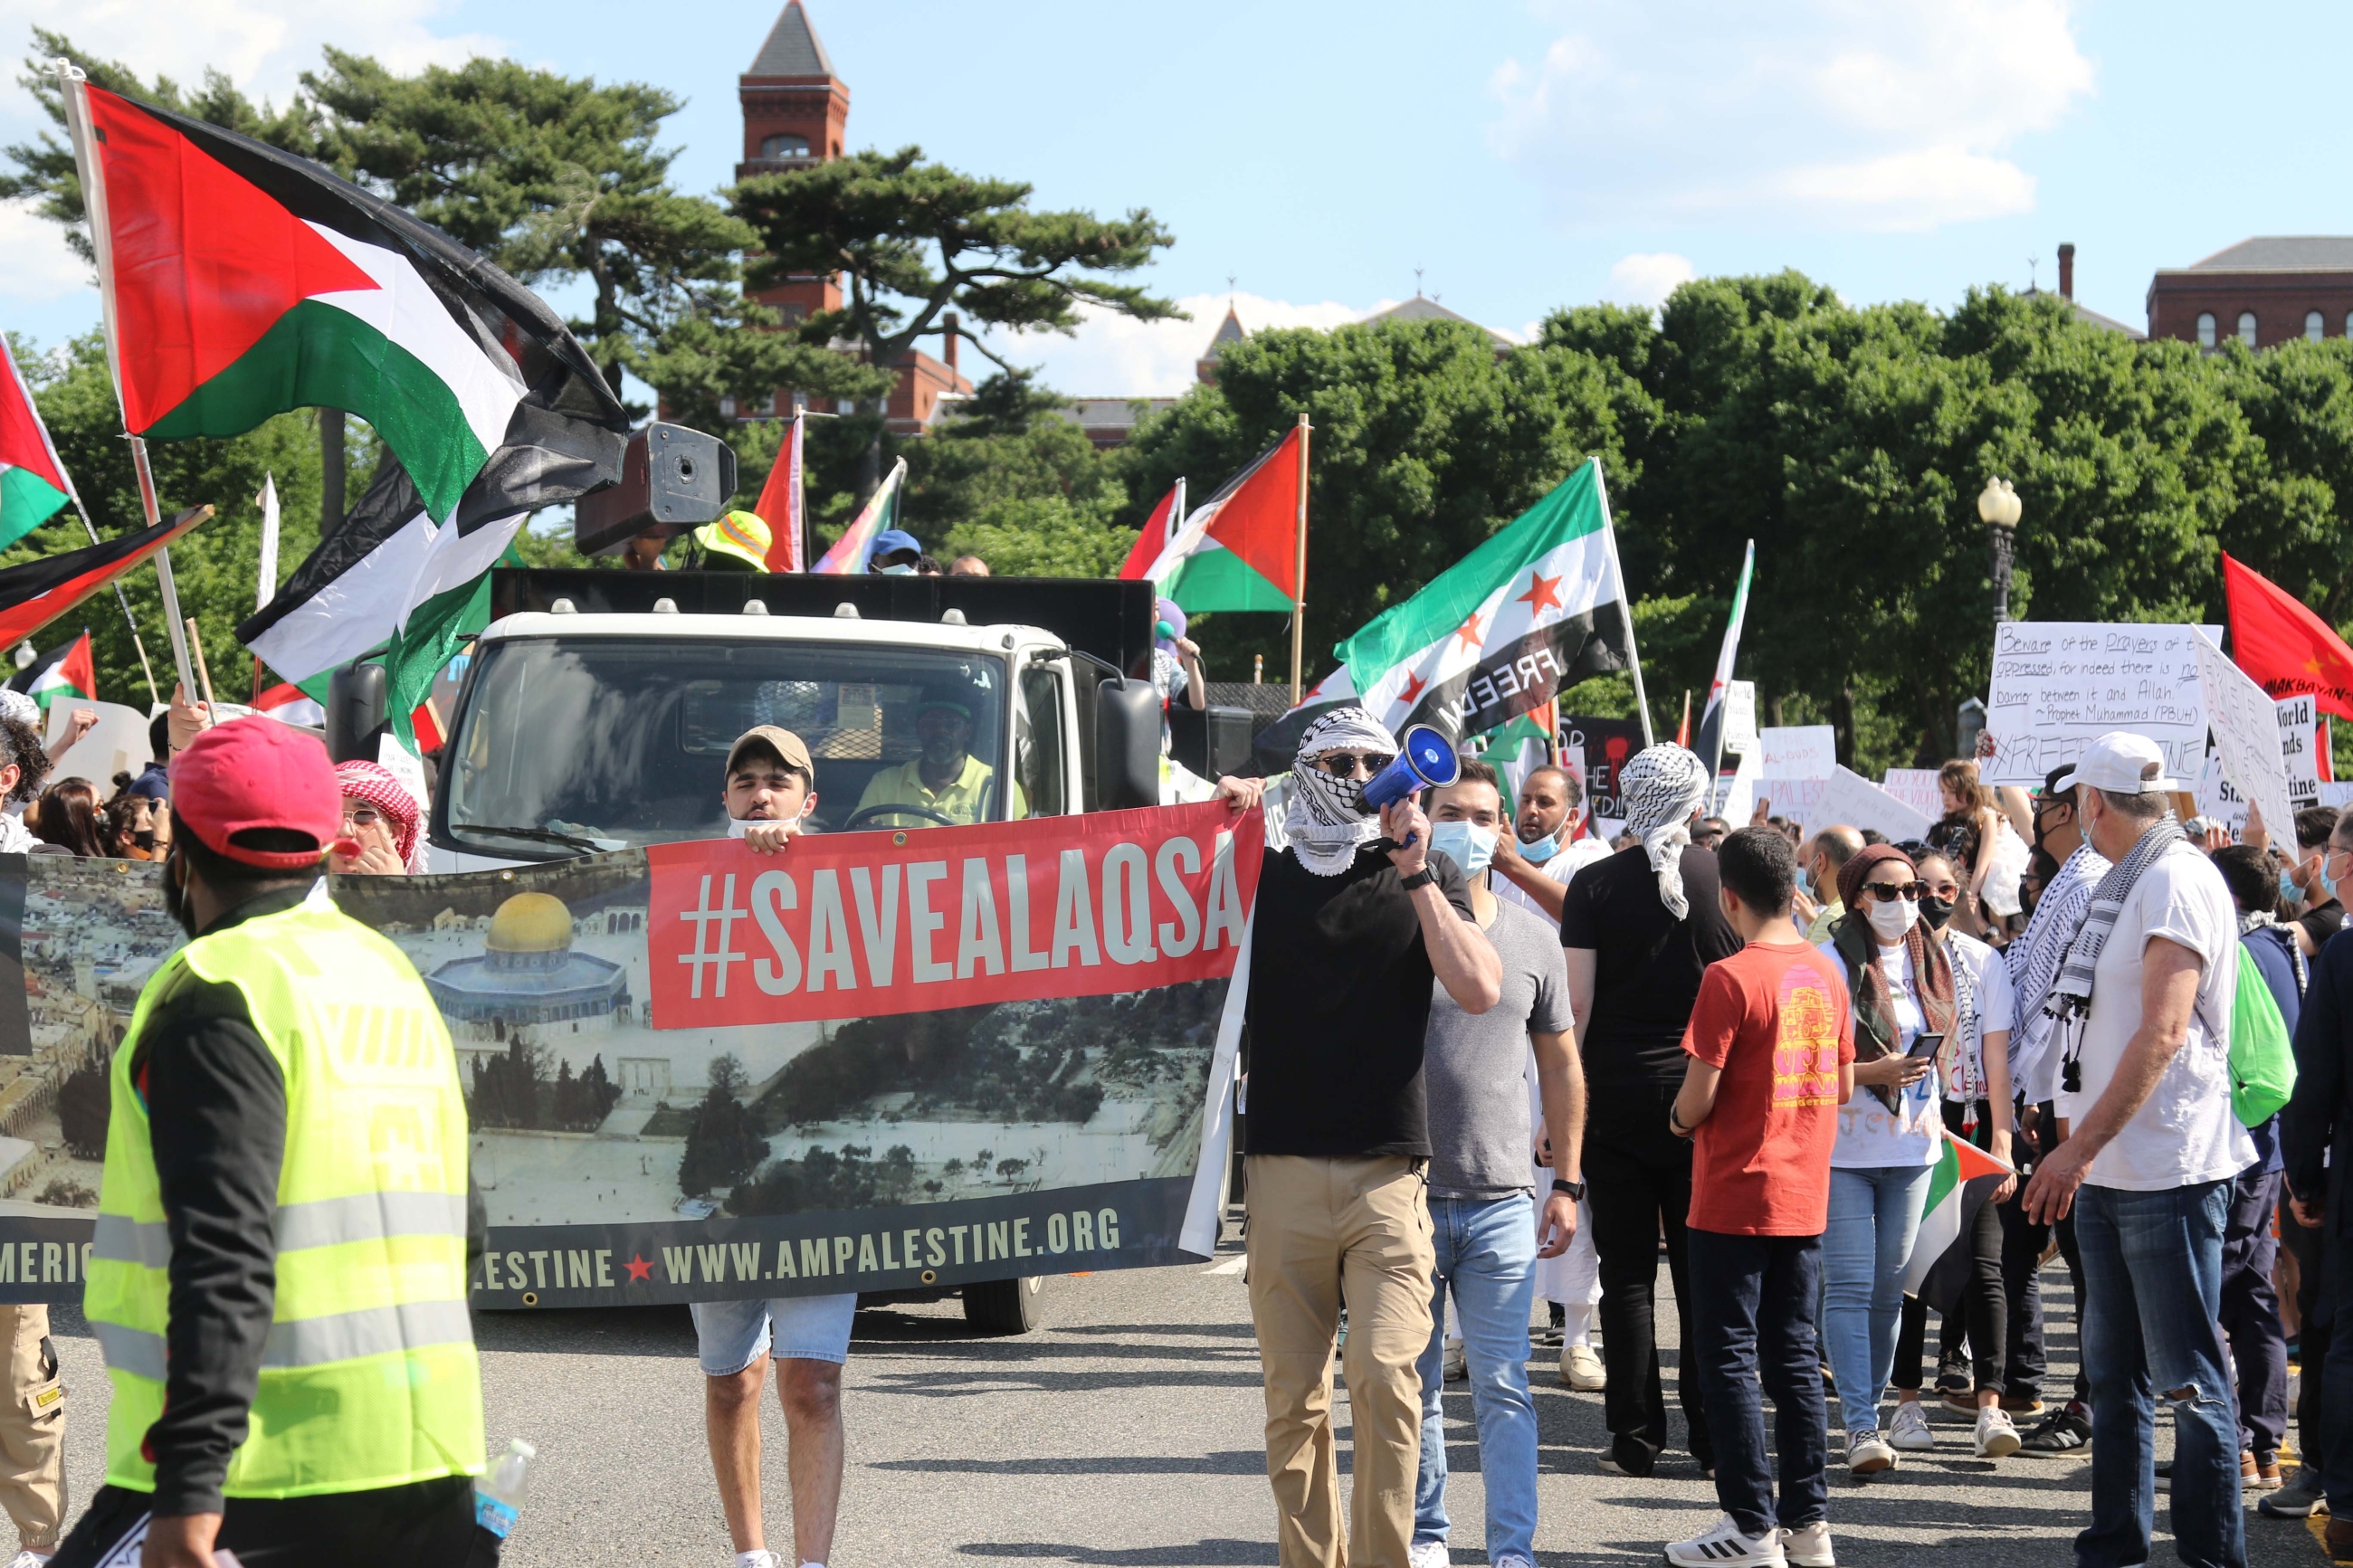 Protesters rally in Washington in solidarity with Palestinians in the occupied West Bank and Gaza.